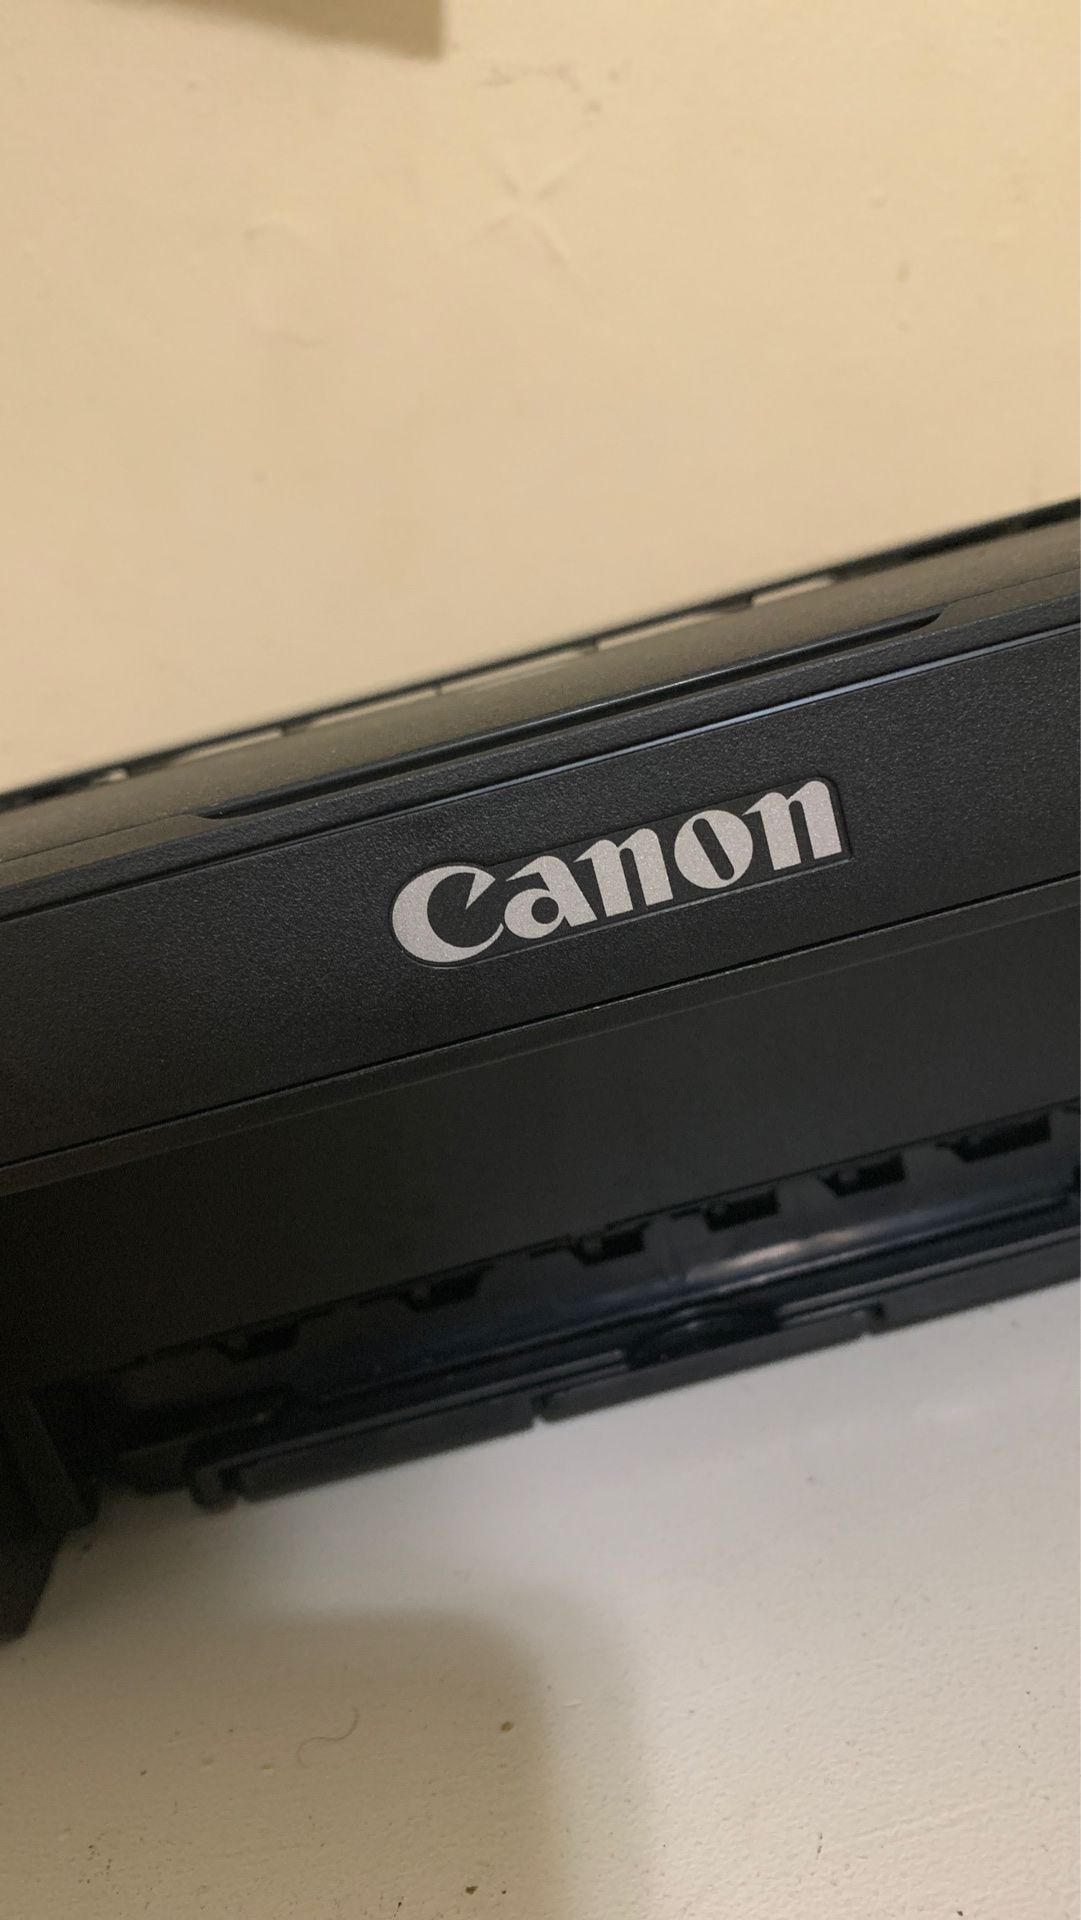 New Canon printer (comes with everything you need )❗️